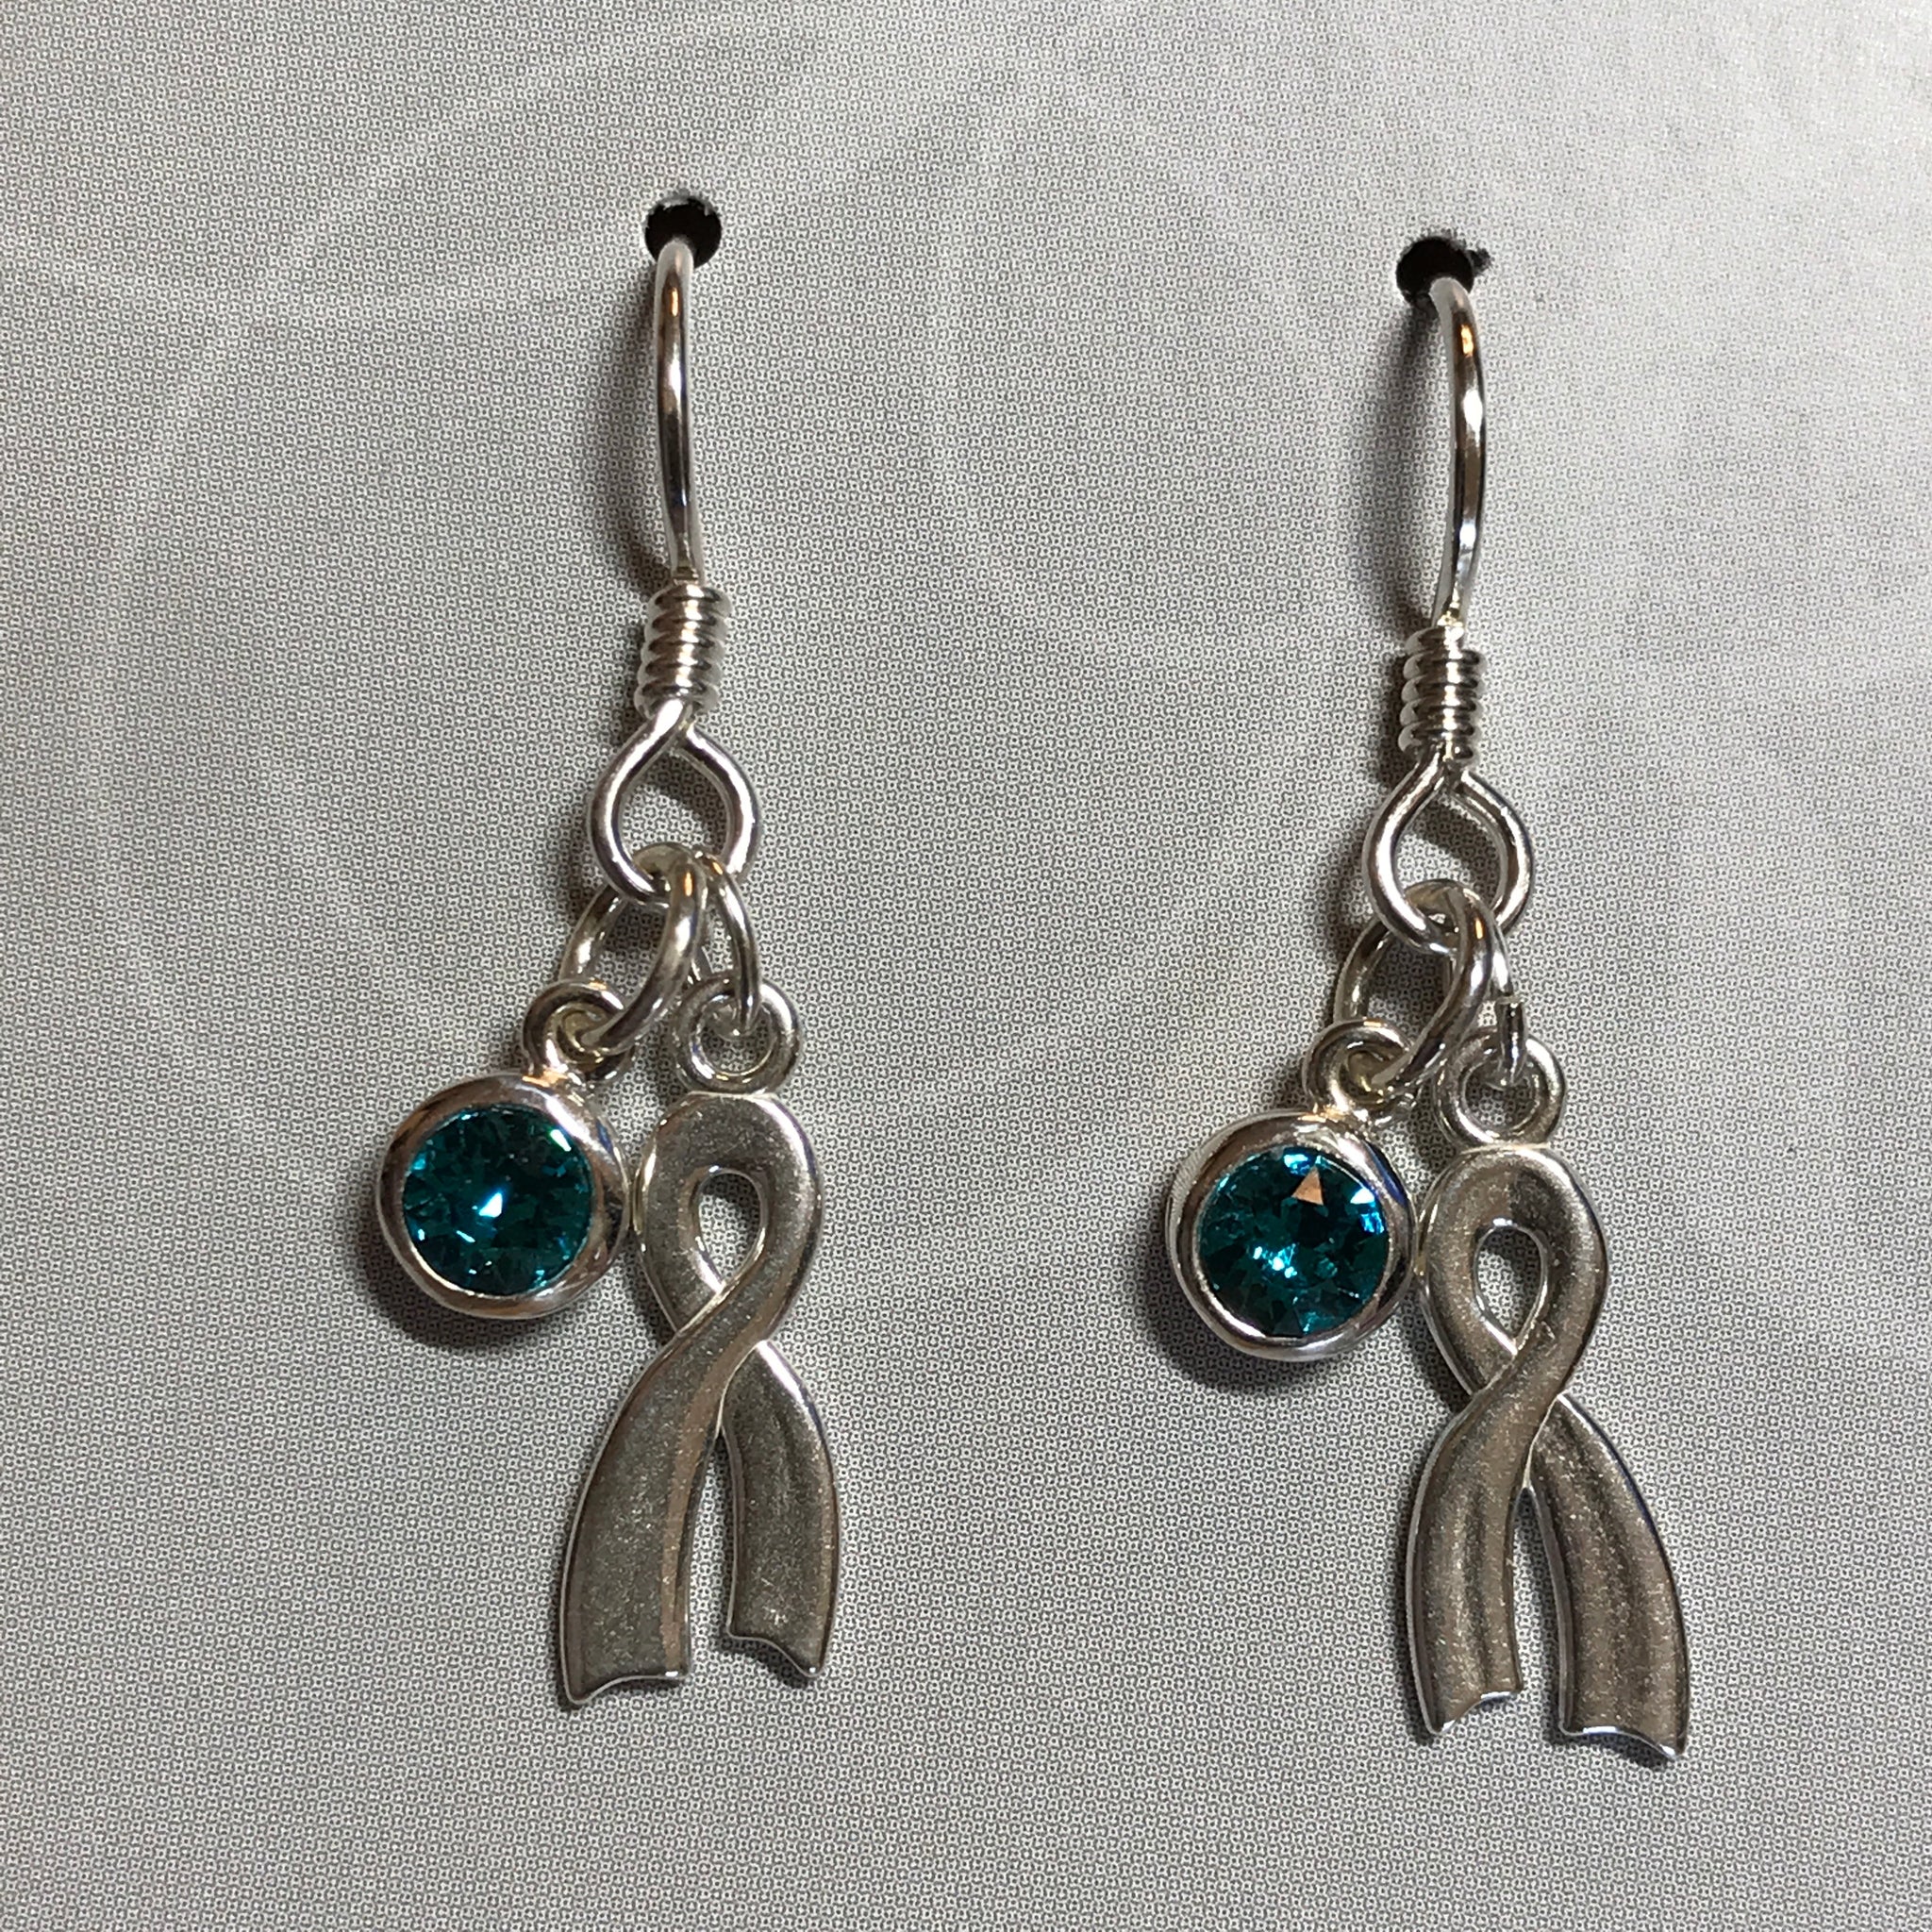 Sterling silver awareness ribbon earrings with Swarovski crystals